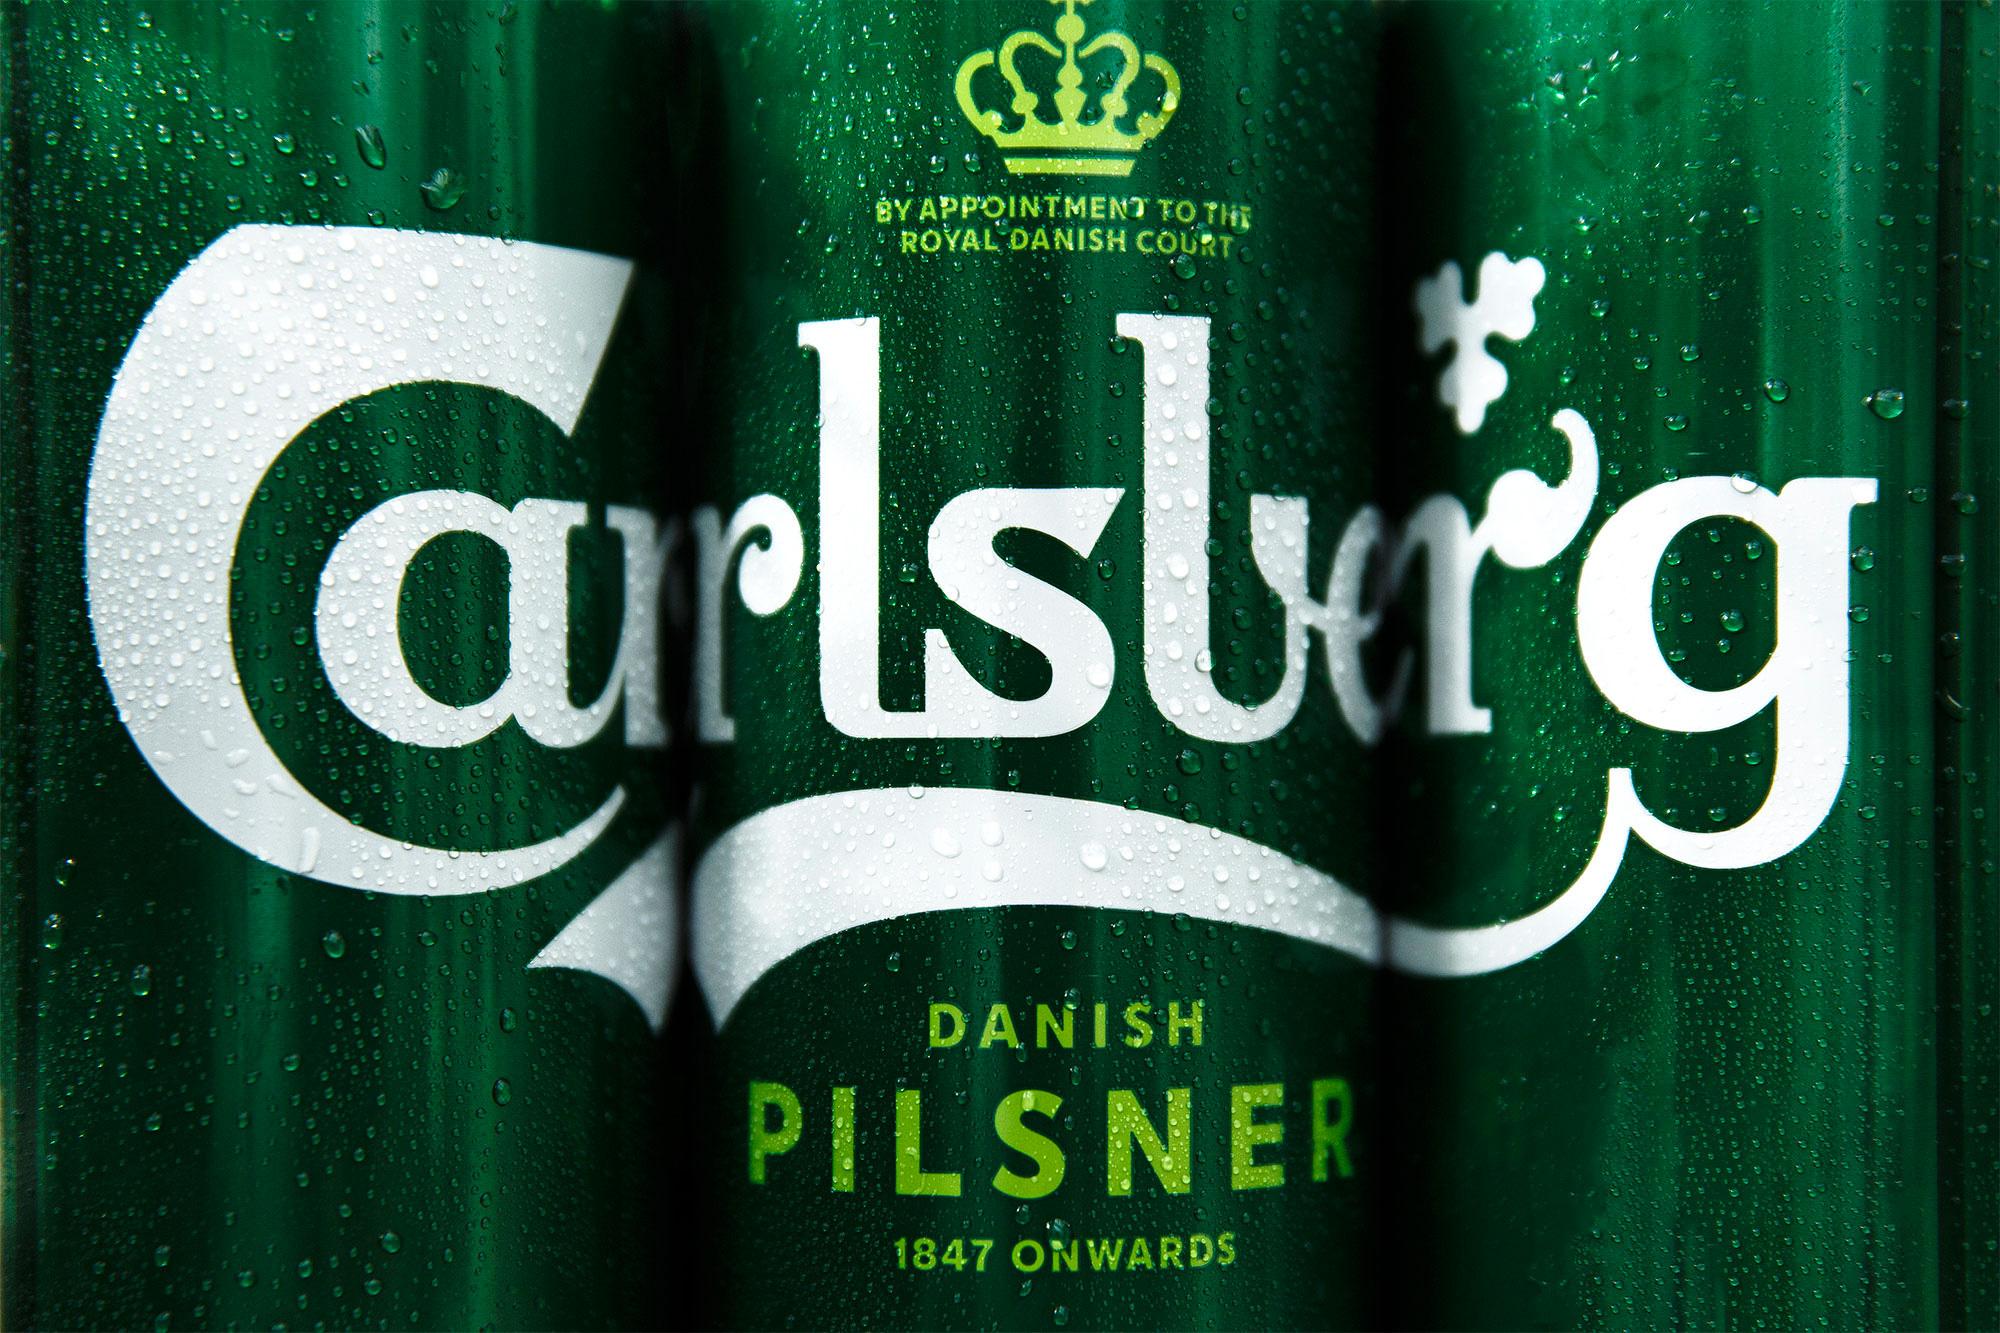 Carlsberg Logo - Brand New: New Logo and Packaging for Carlsberg by Taxi Studio